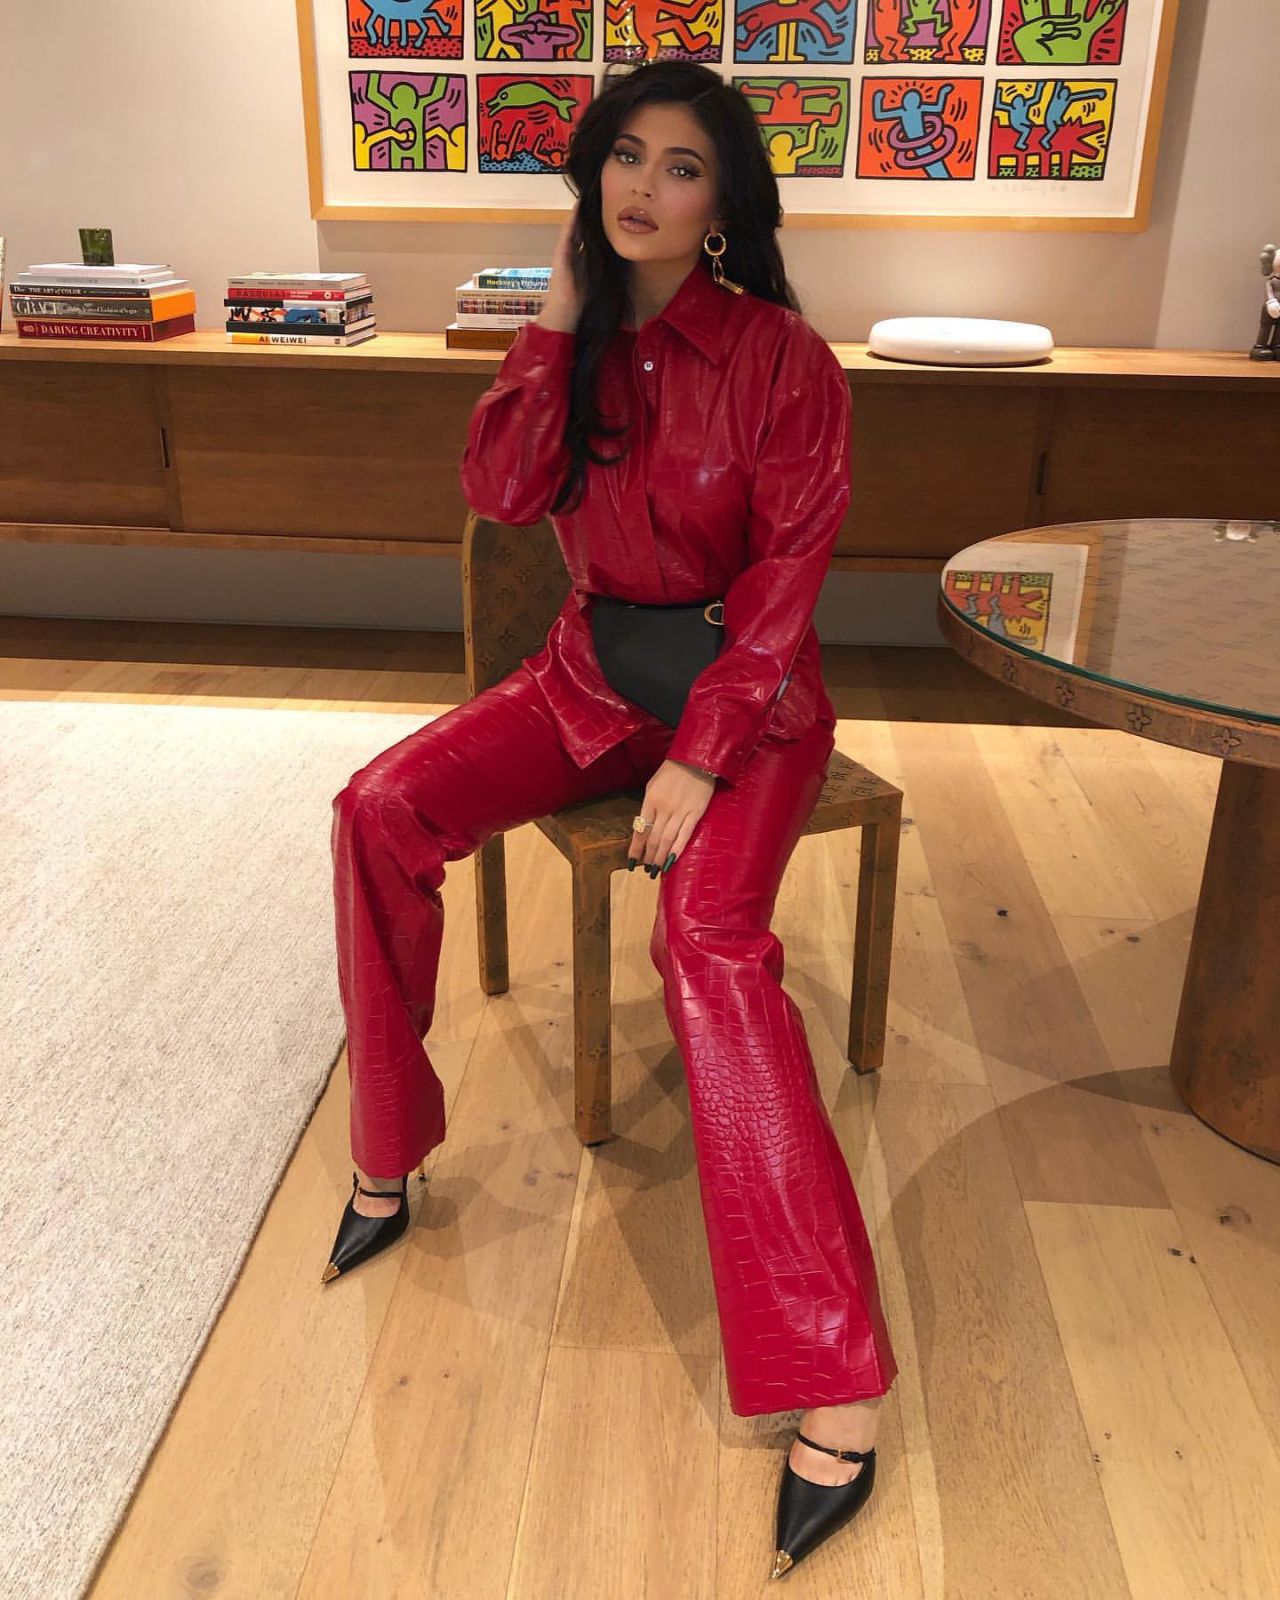 Kylie Jenner gorgeous in sexy red outfit and heels social media photos